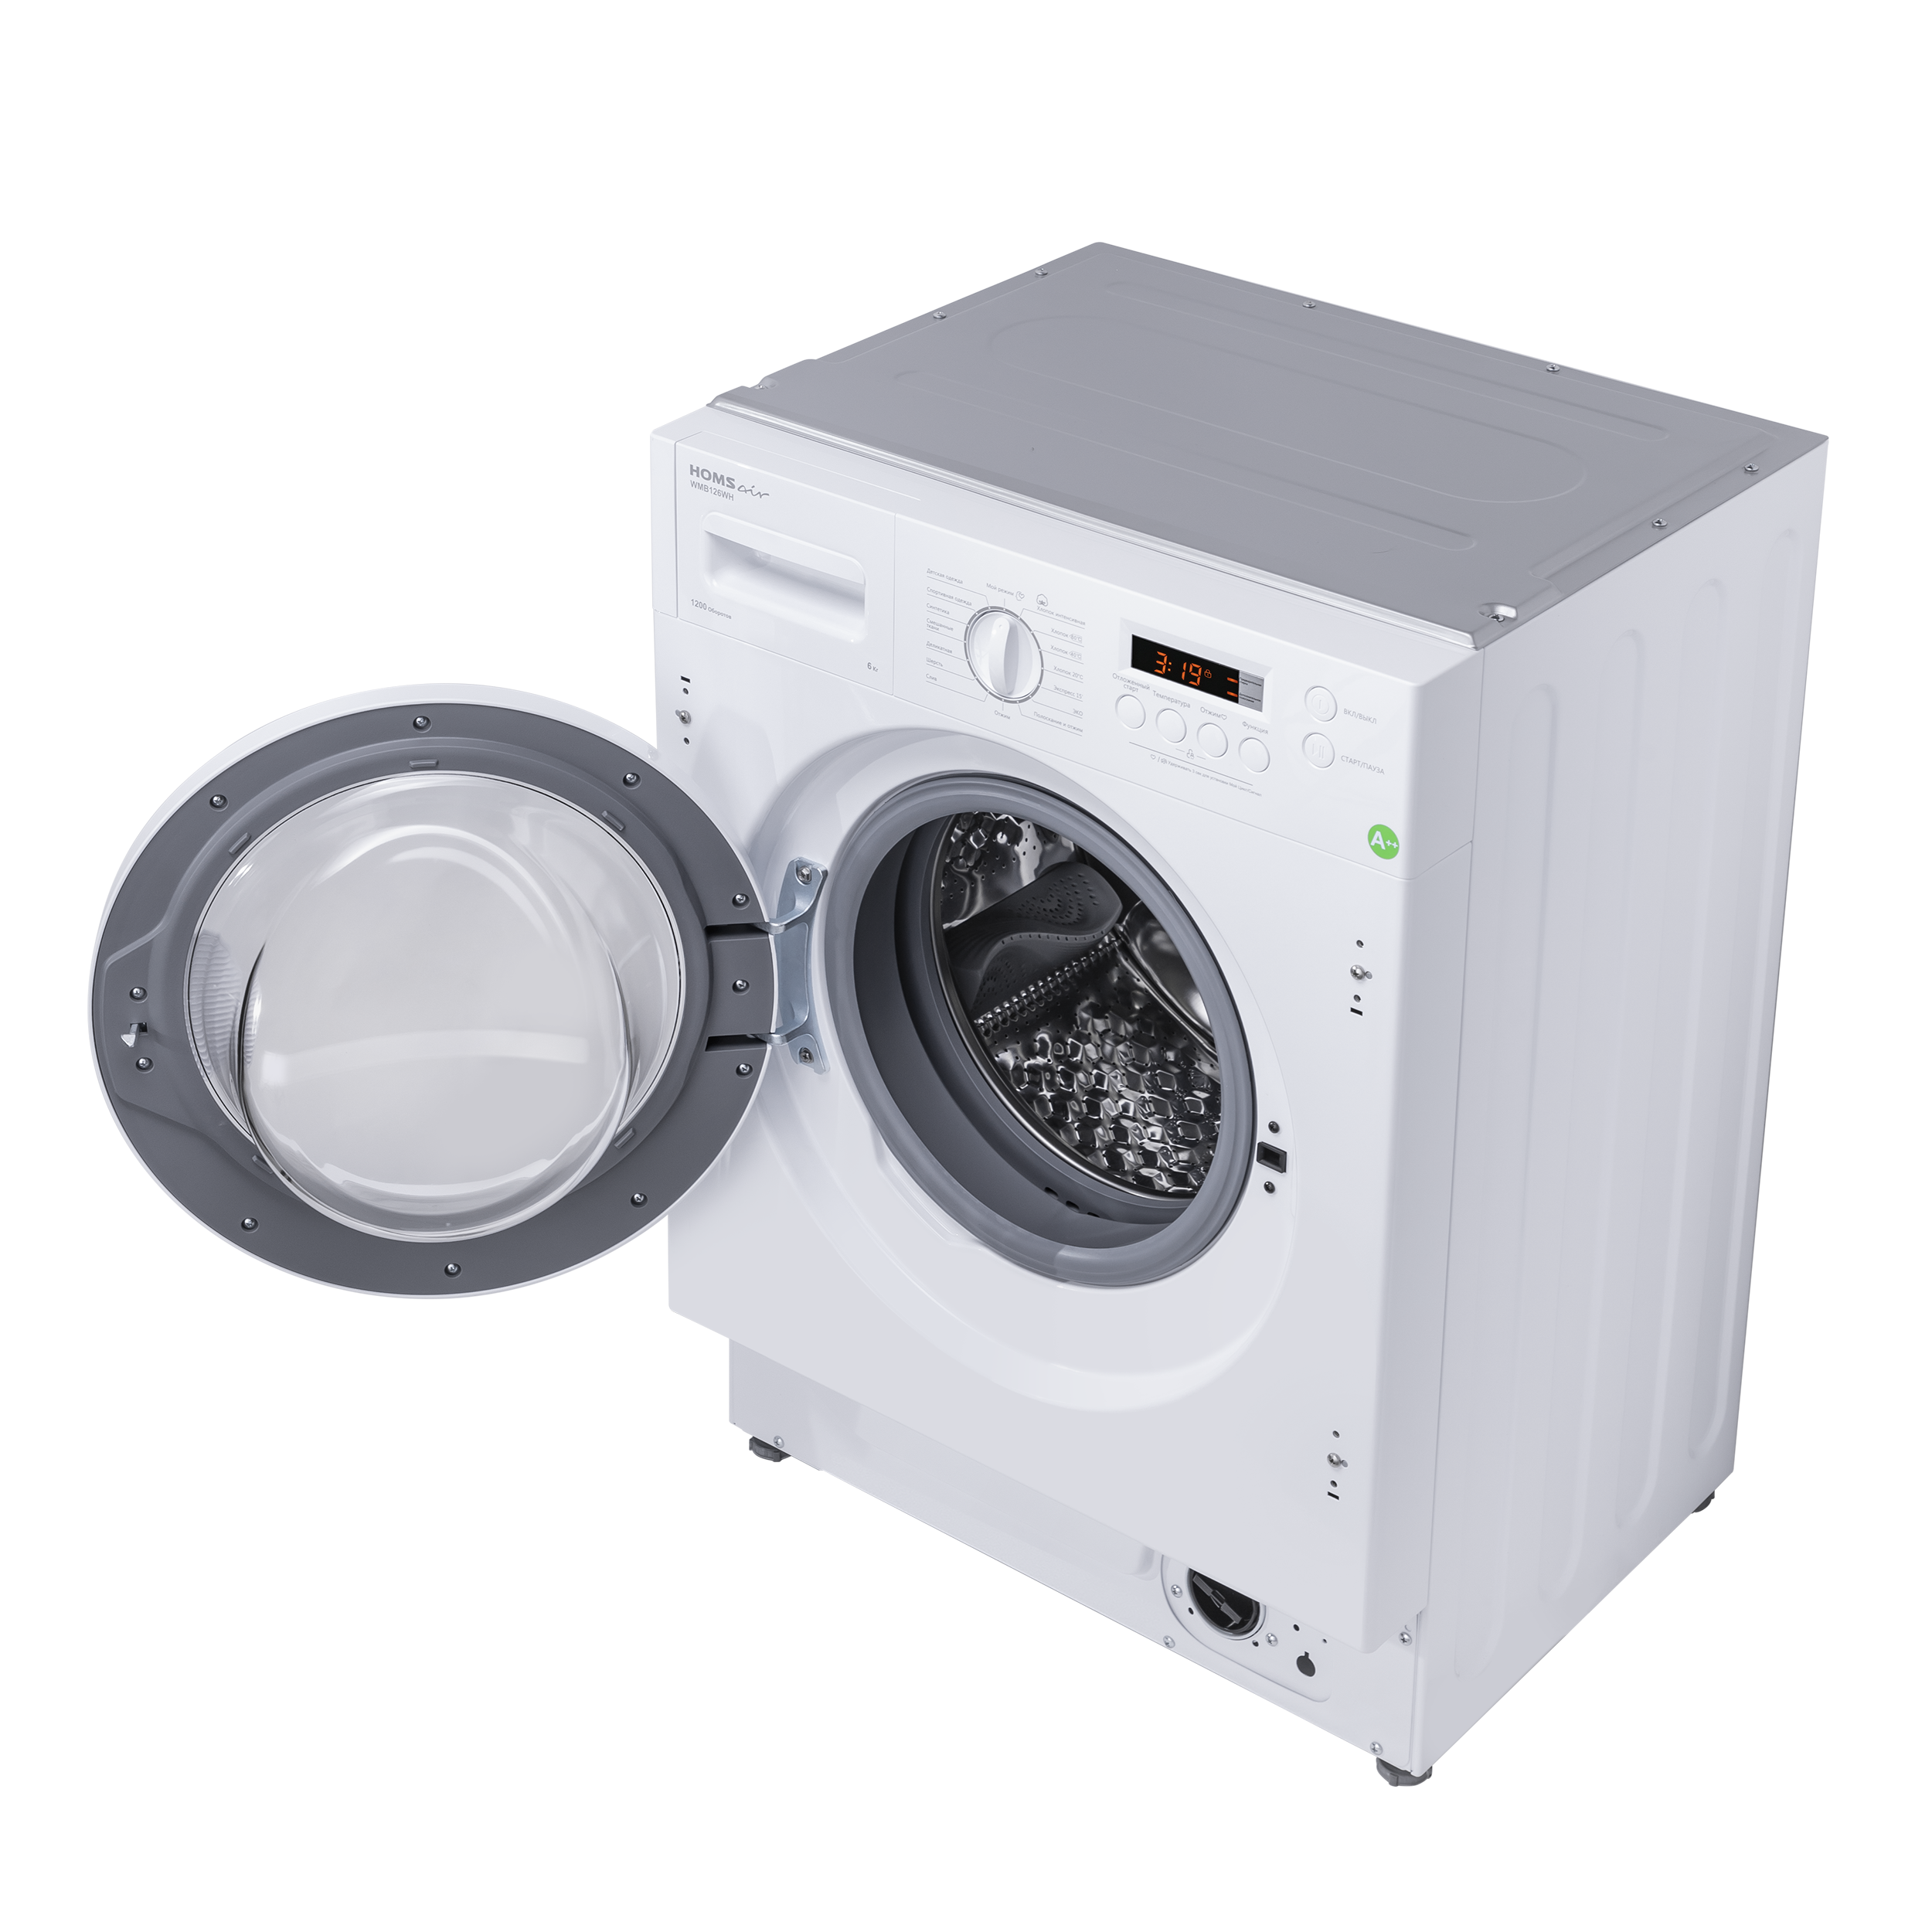 Clothes Dryer PNG Free Image